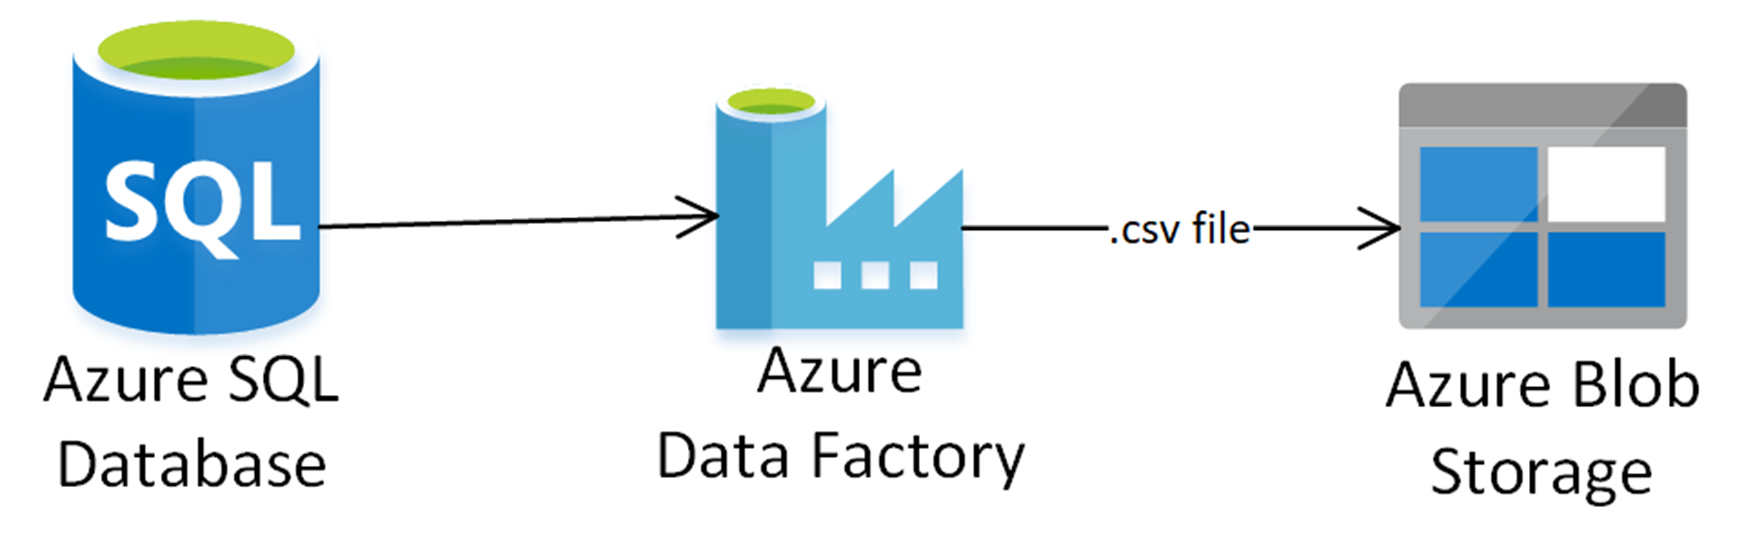 Get metadata from Blob storage with folder like structure using Azure  Data Factory pipeline - Stack Overflow